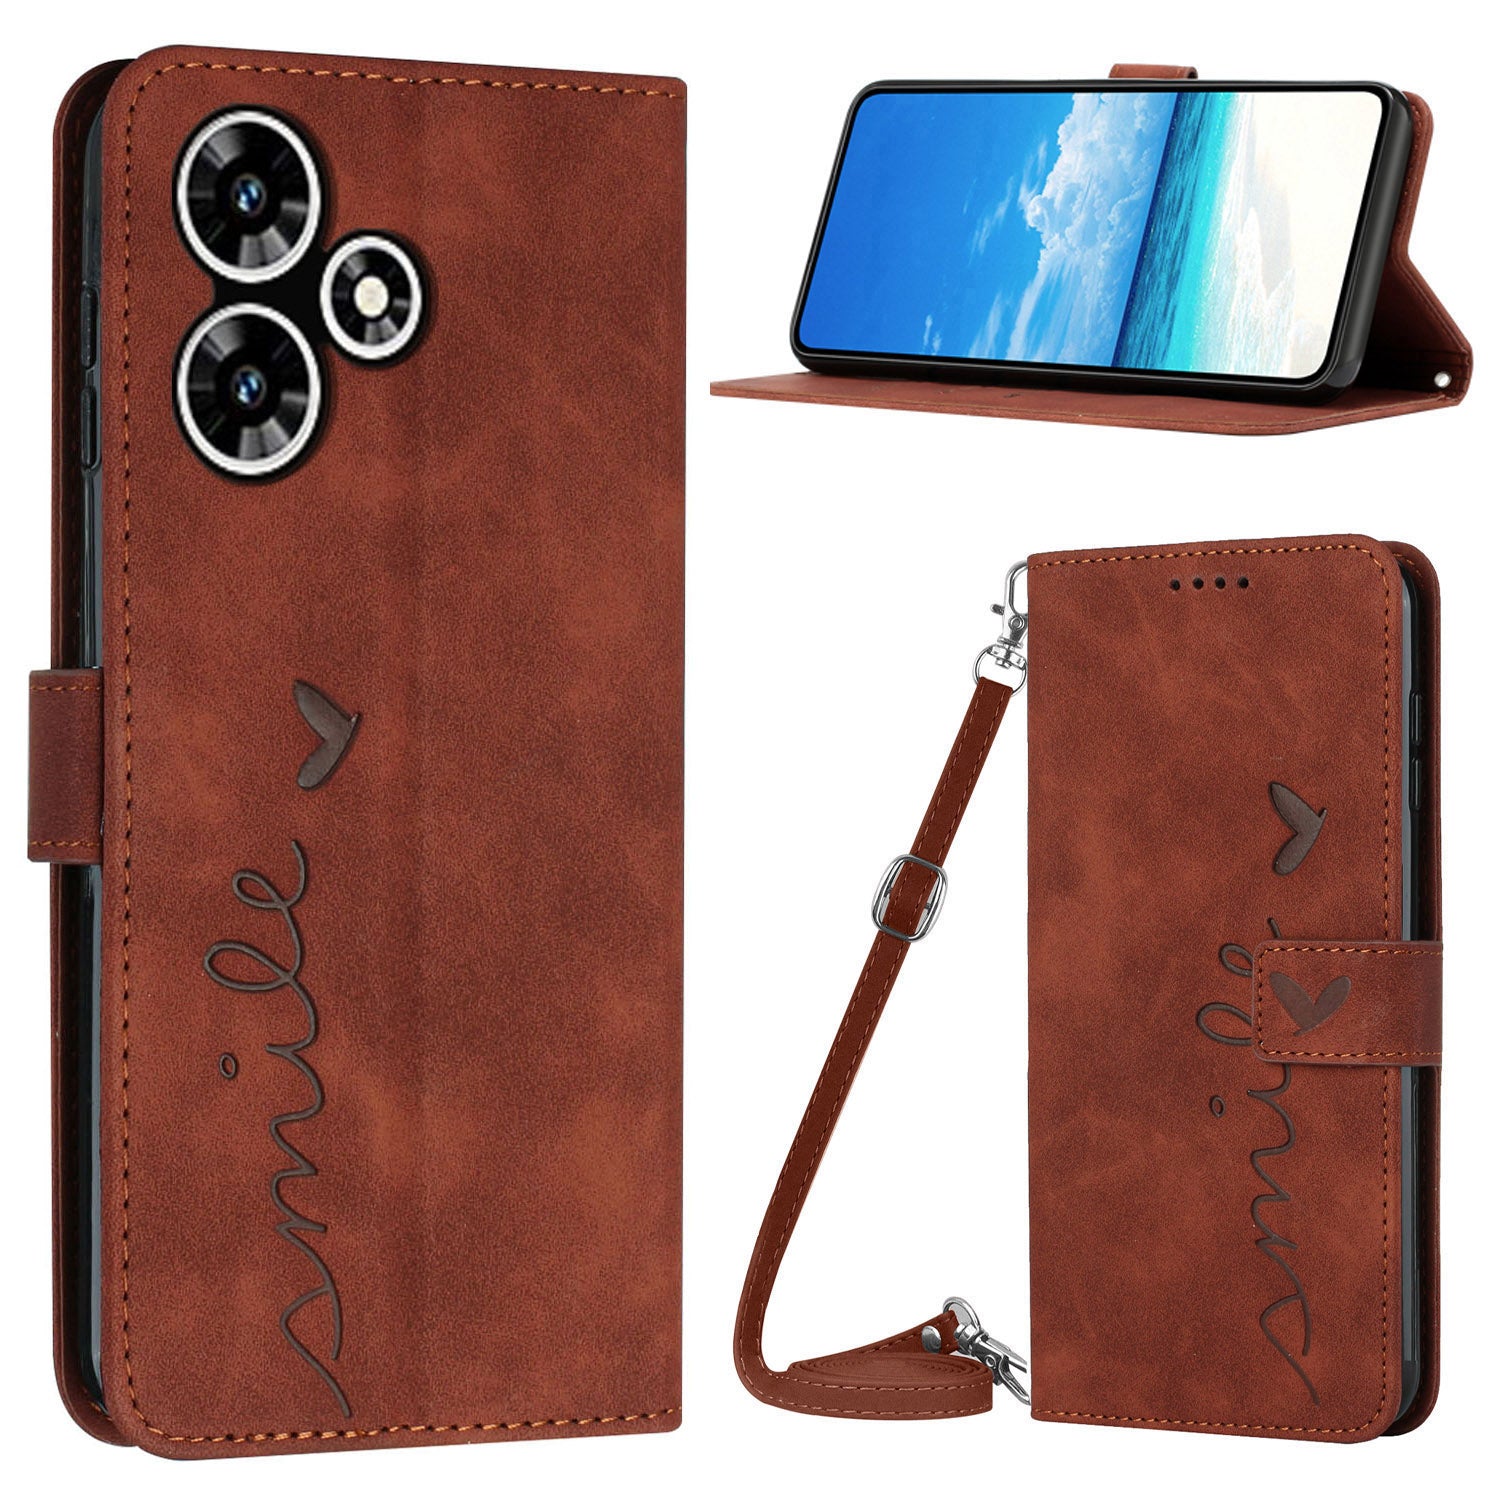 Wallet PU Leather Case for Infinix Hot 30 , Heart Shape Phone Stand Cover with Shoulder Strap - Brown